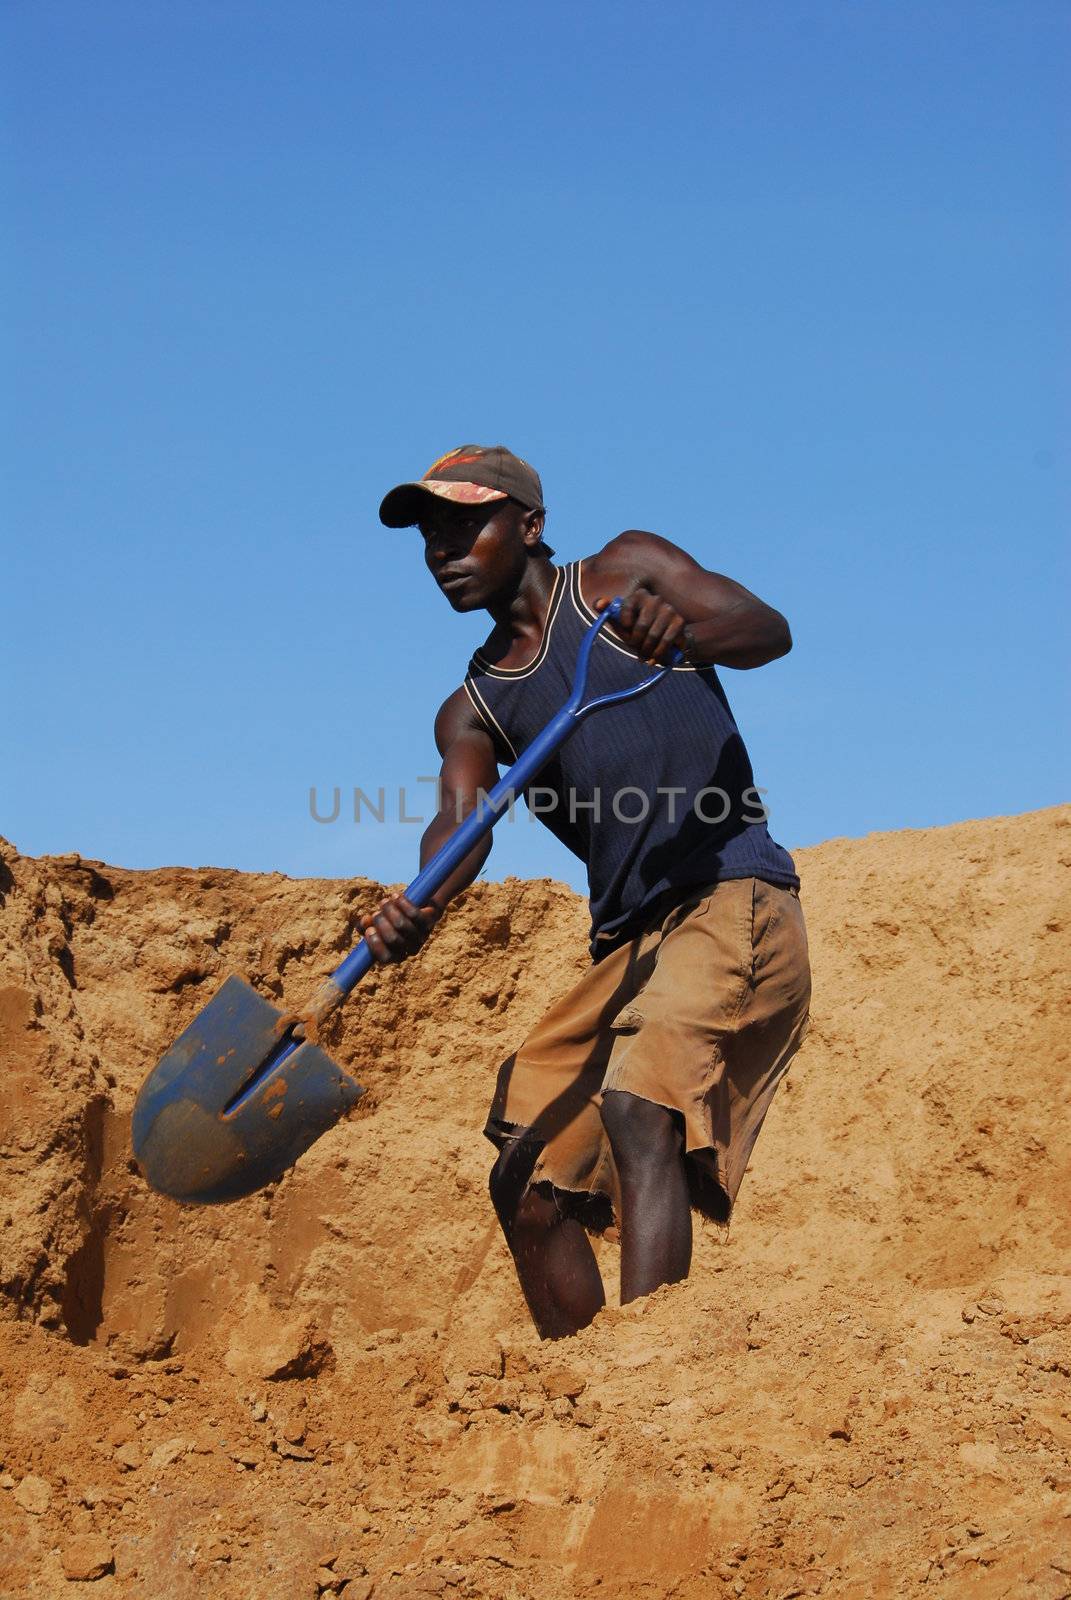 Shinyanga, Tanzania March 18, 2010: Miner shoveling sand in a gold mine. Tanzania is the third gold producer in Africa after Ghana and South Africa.